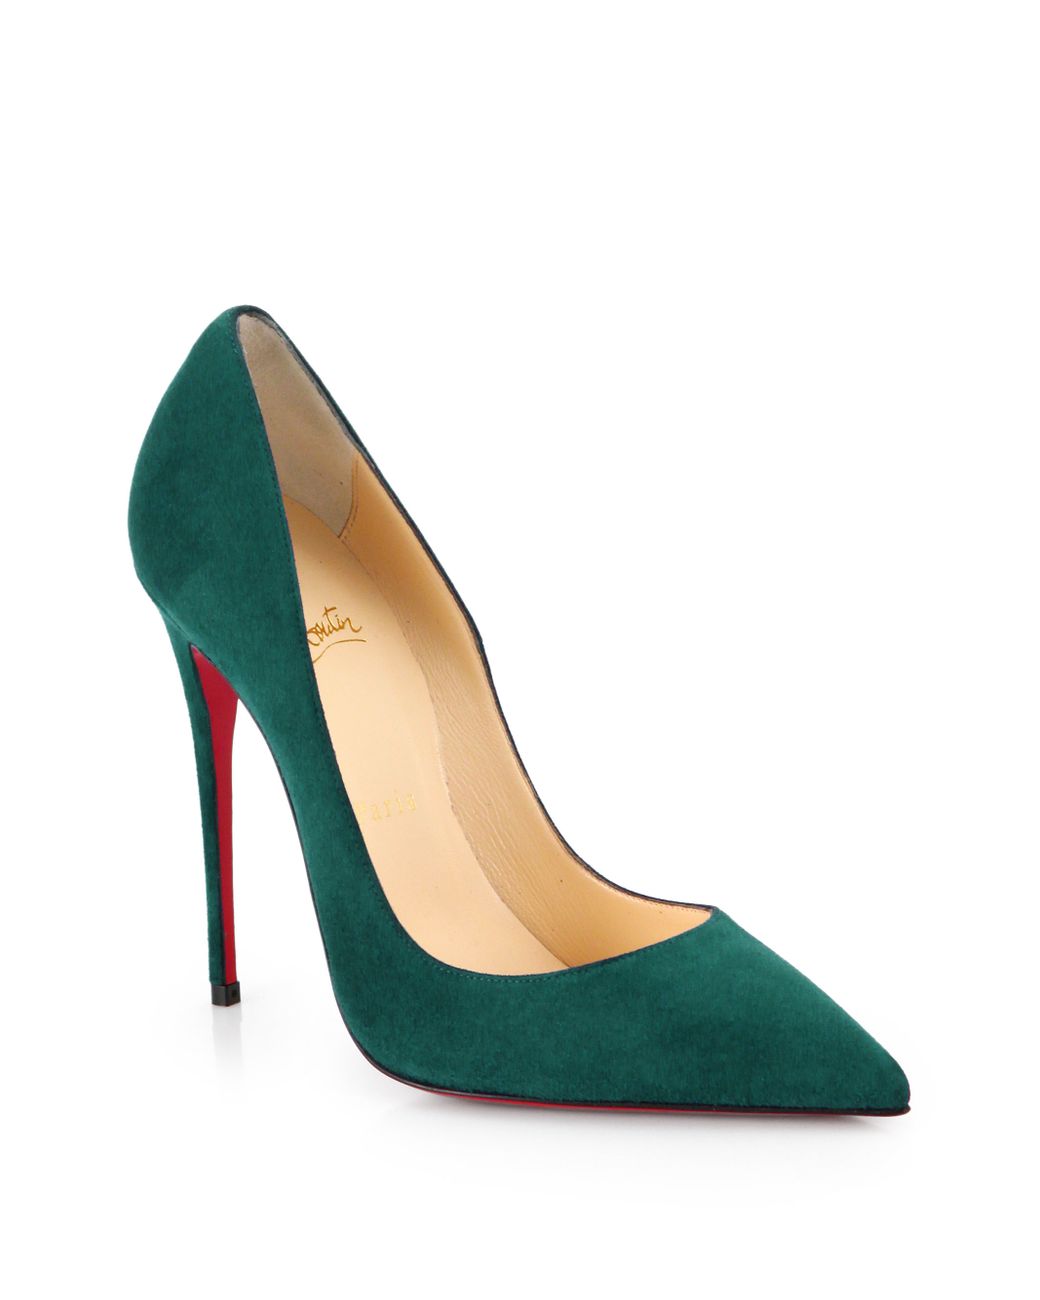 Christian Louboutin So Kate Suede Pumps in Green | Lyst